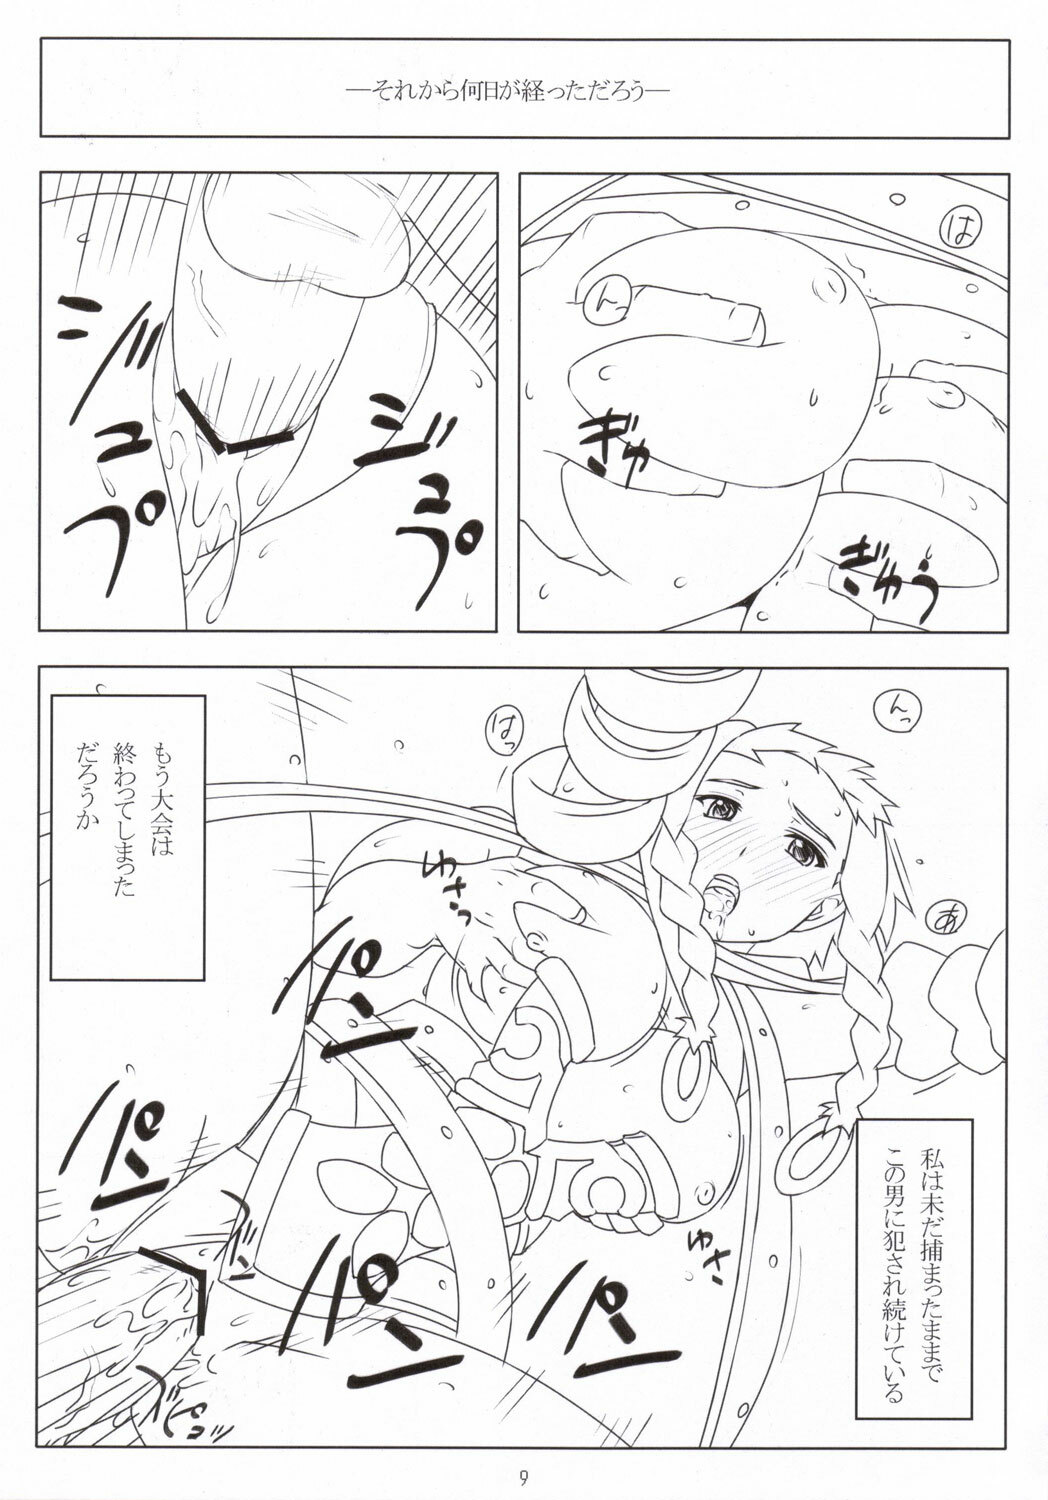 (C69) [NF121 (Midori Aoi)] Ken to Megane (Queen's Blade) page 8 full